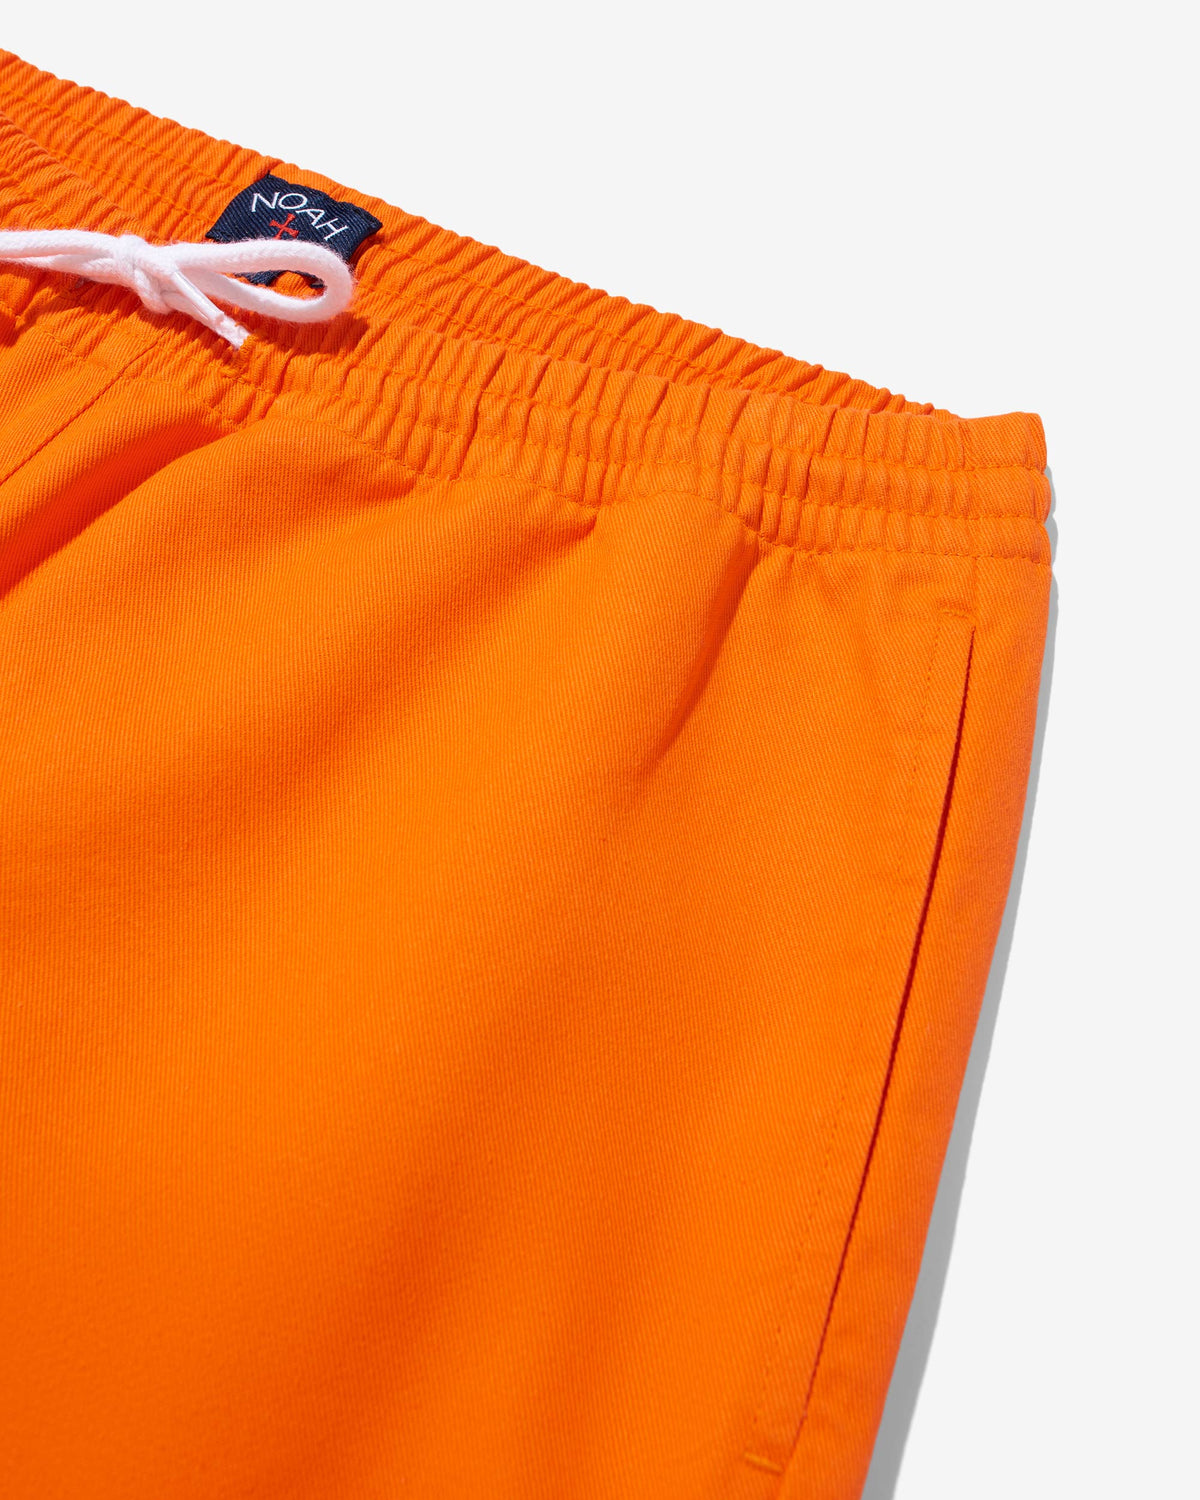 NOAH CLUBHOUSE   Twill Shorts(Yellow)